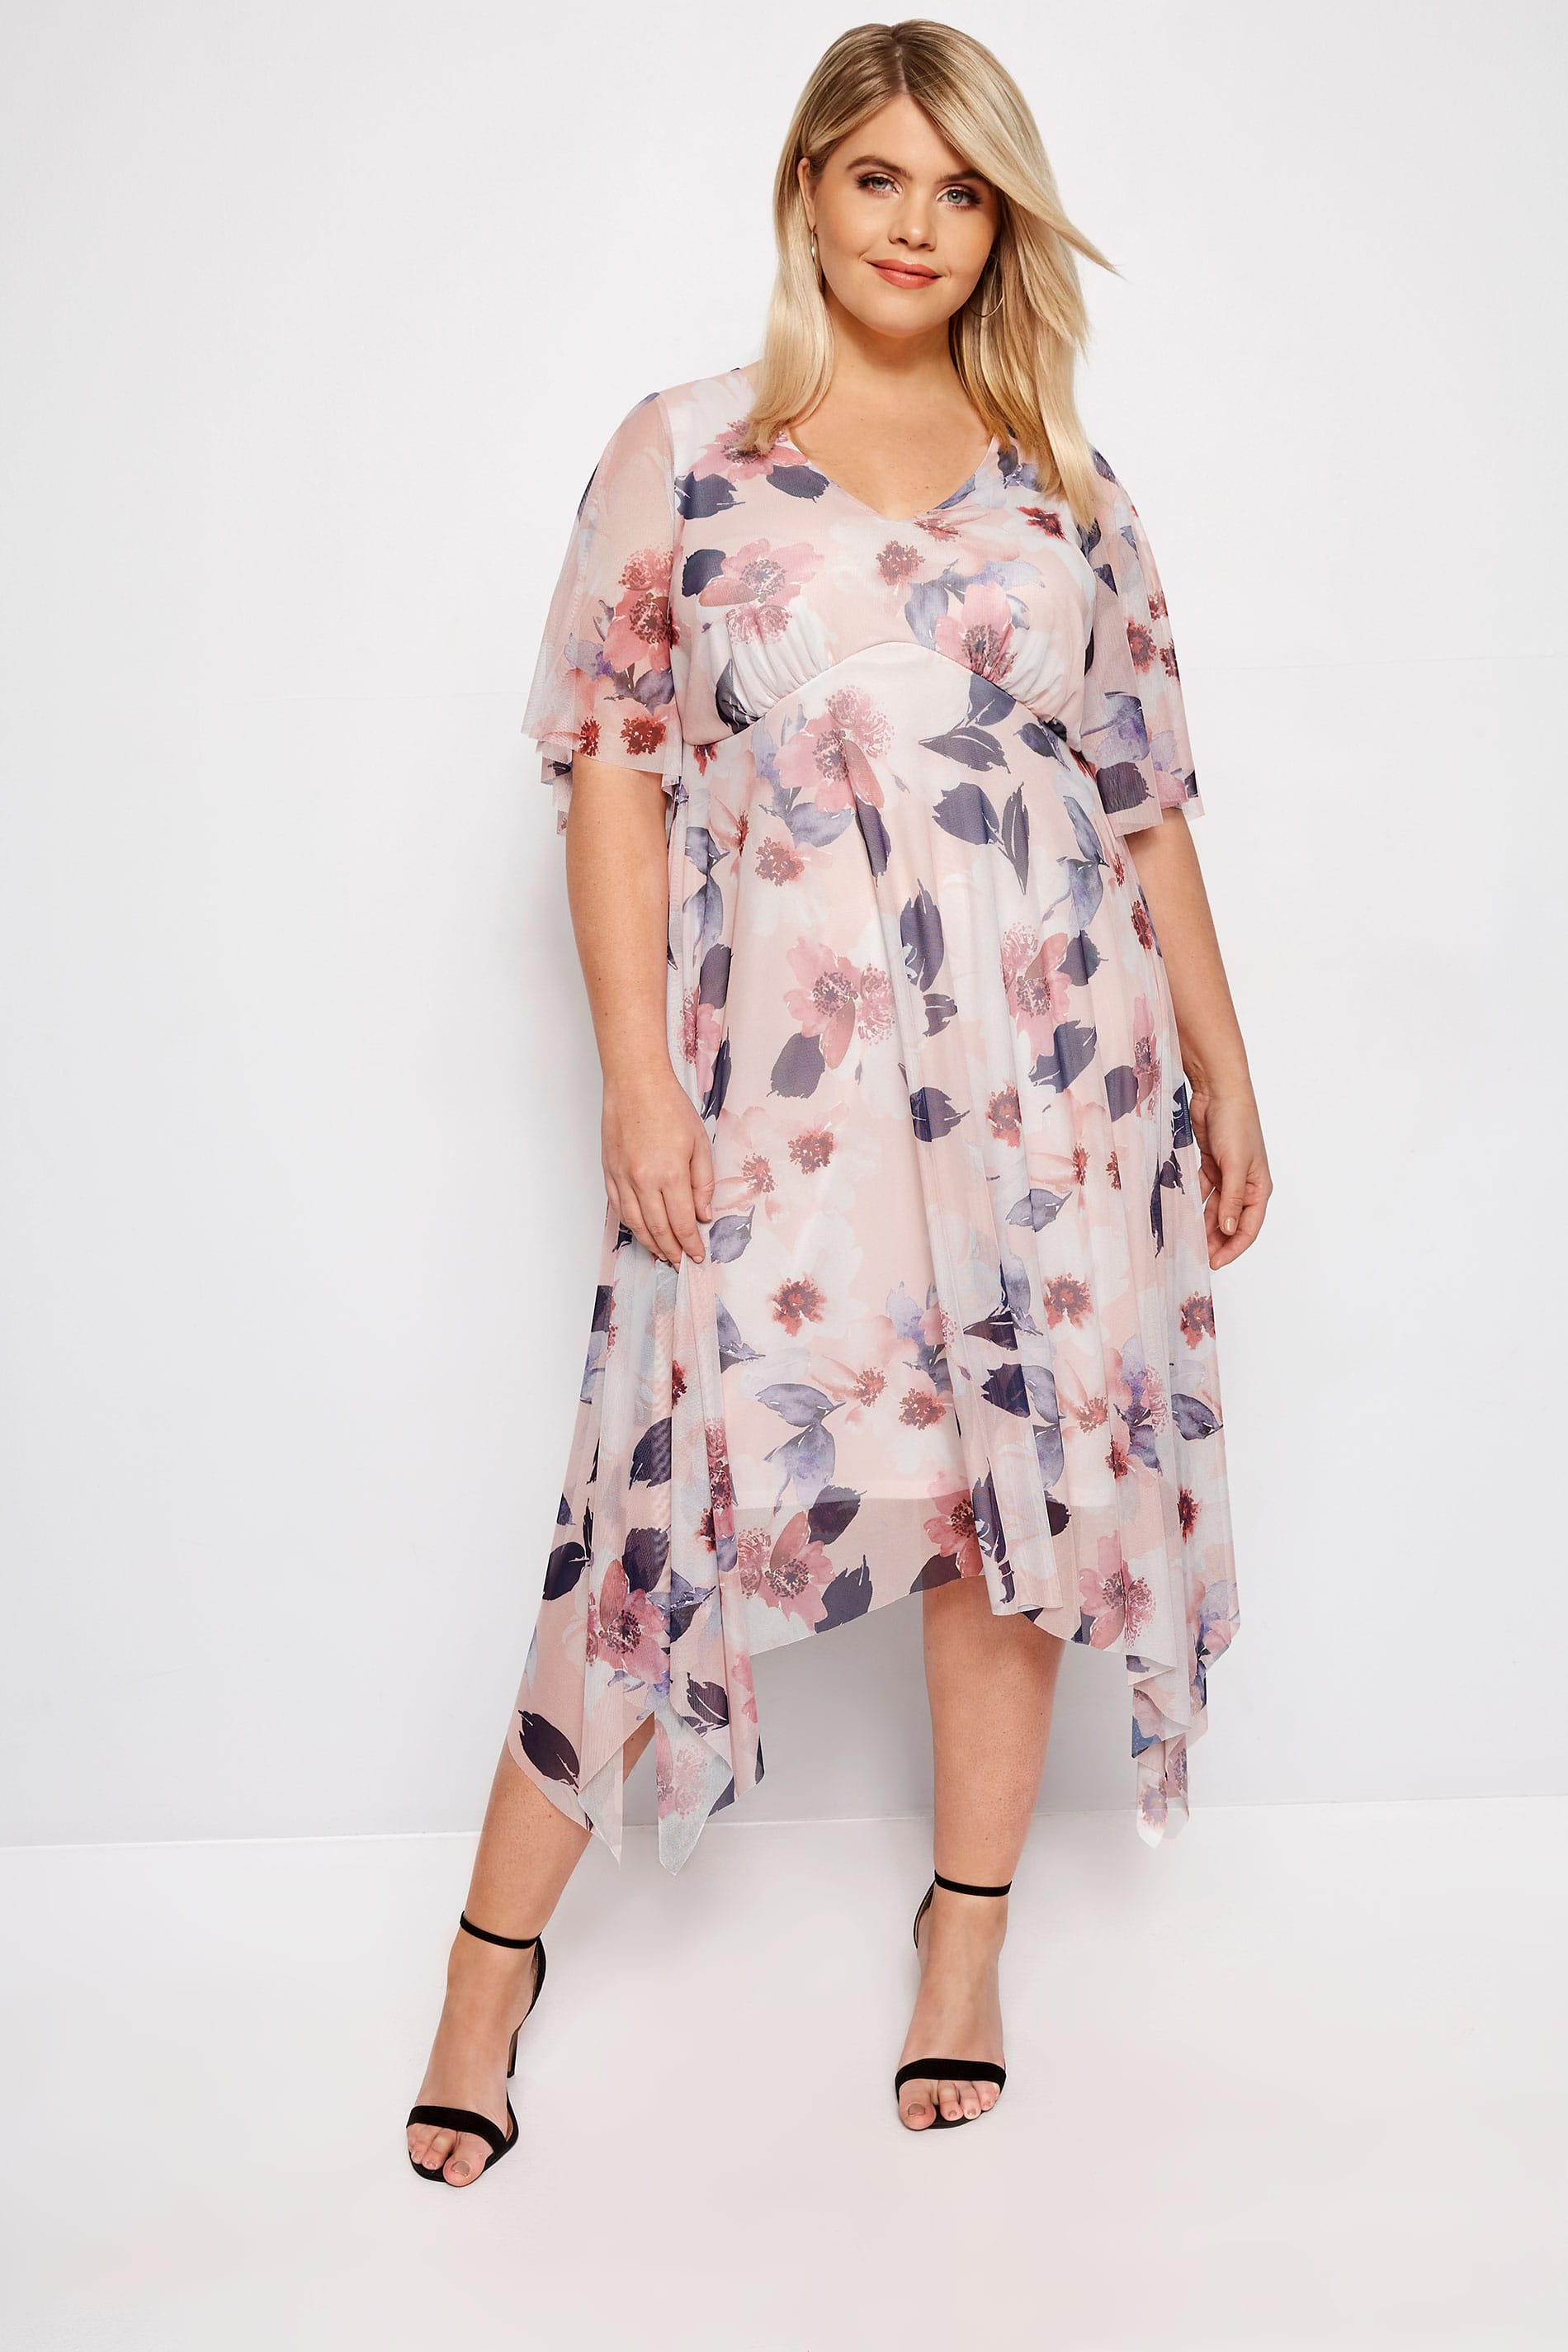 YOURS LONDON Pink Floral Midi Tea Dress | Plus Sizes 16 to 32 | Yours ...